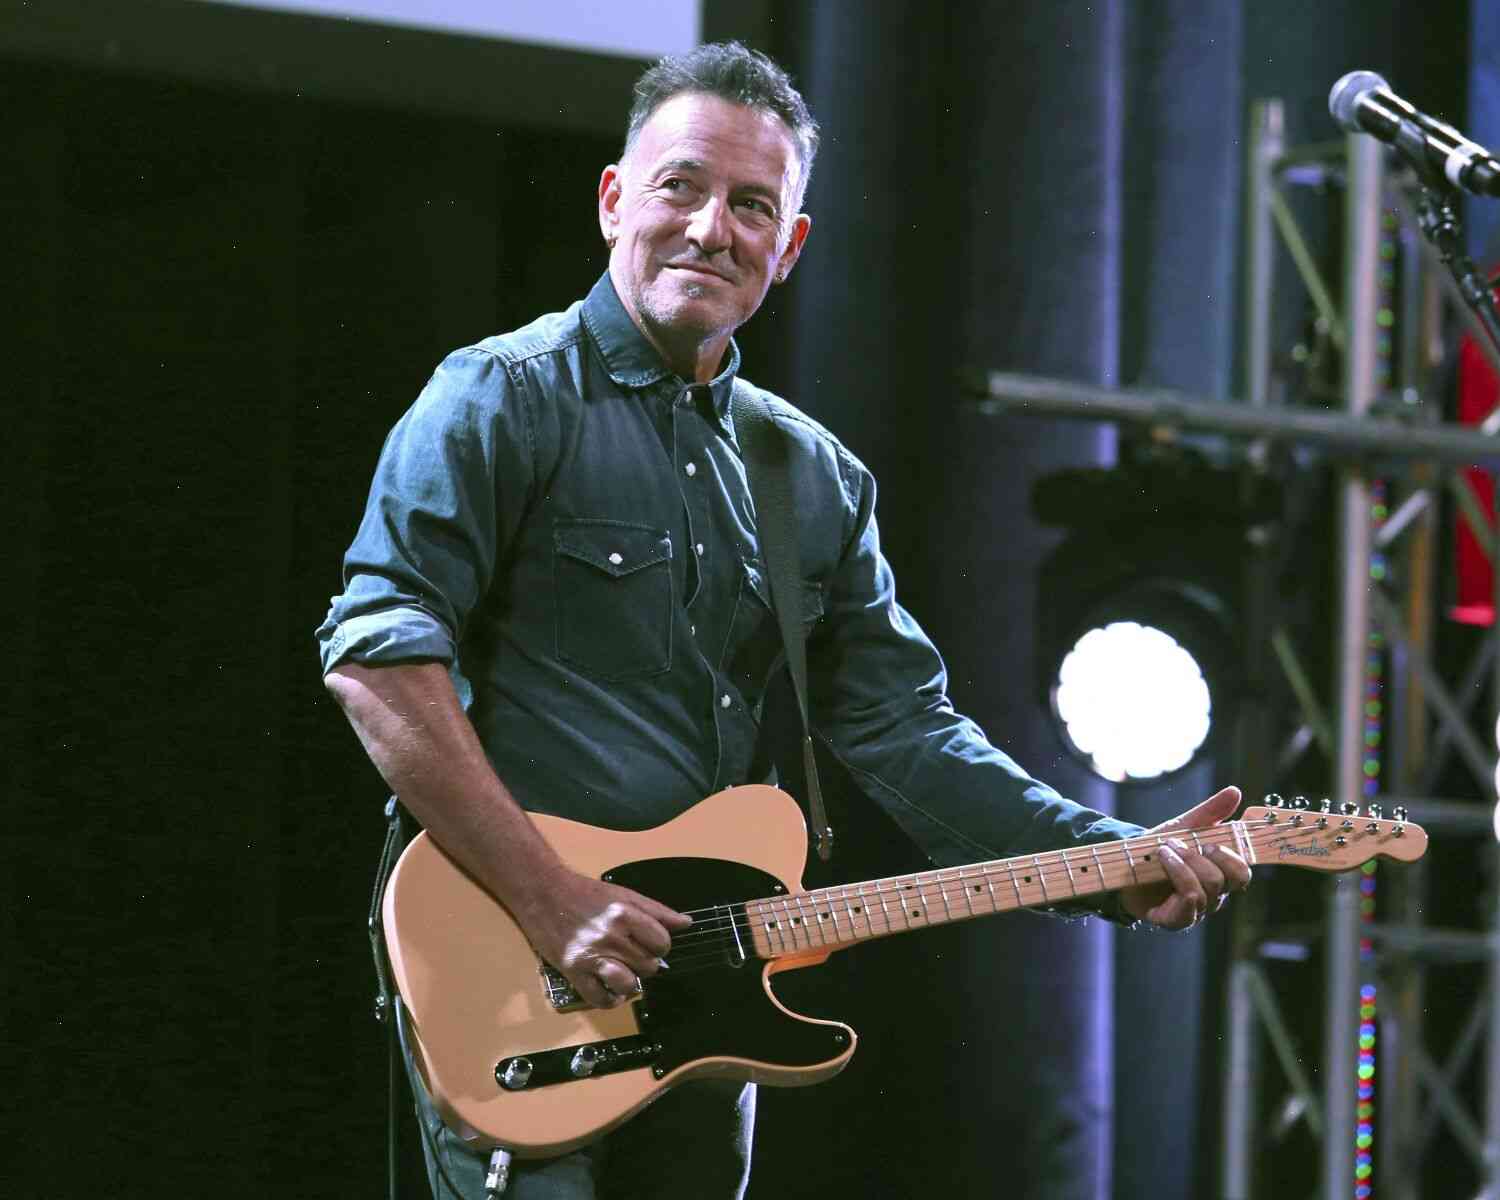 Bruce Springsteen's "Tonight Show" set could serve as the next installment of his "Tonight Show" residency